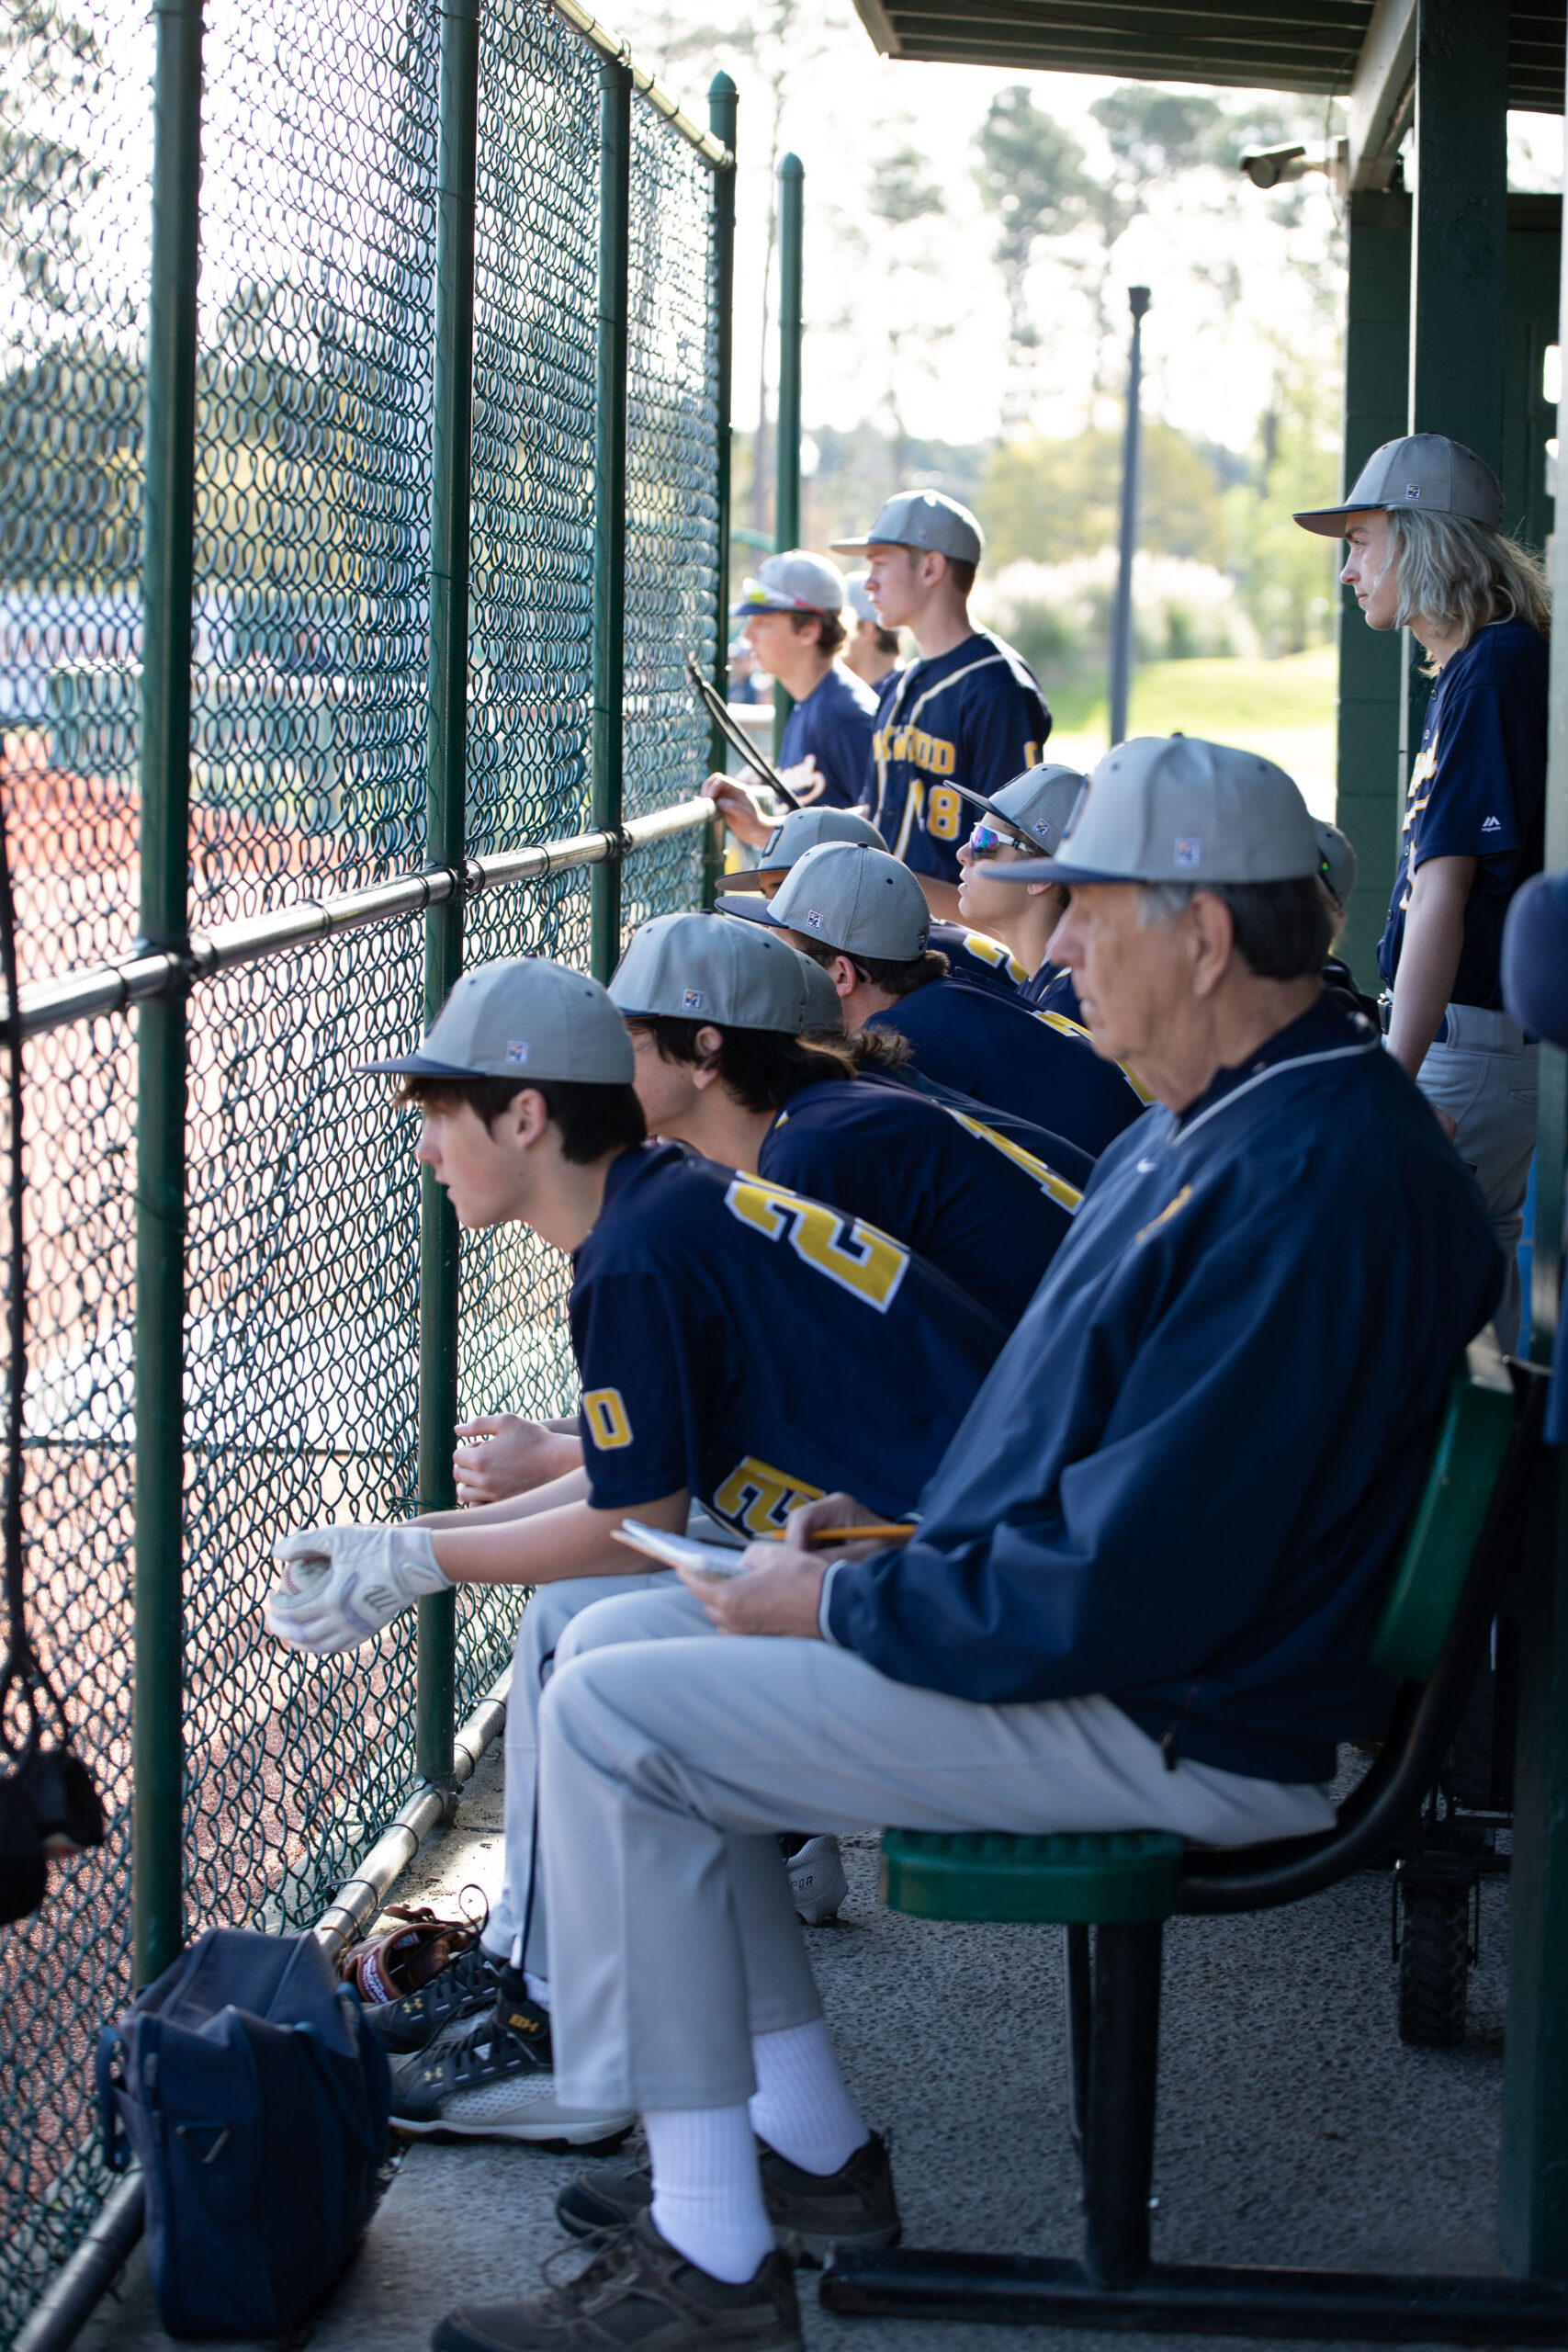 Baseball players sitting in dugout